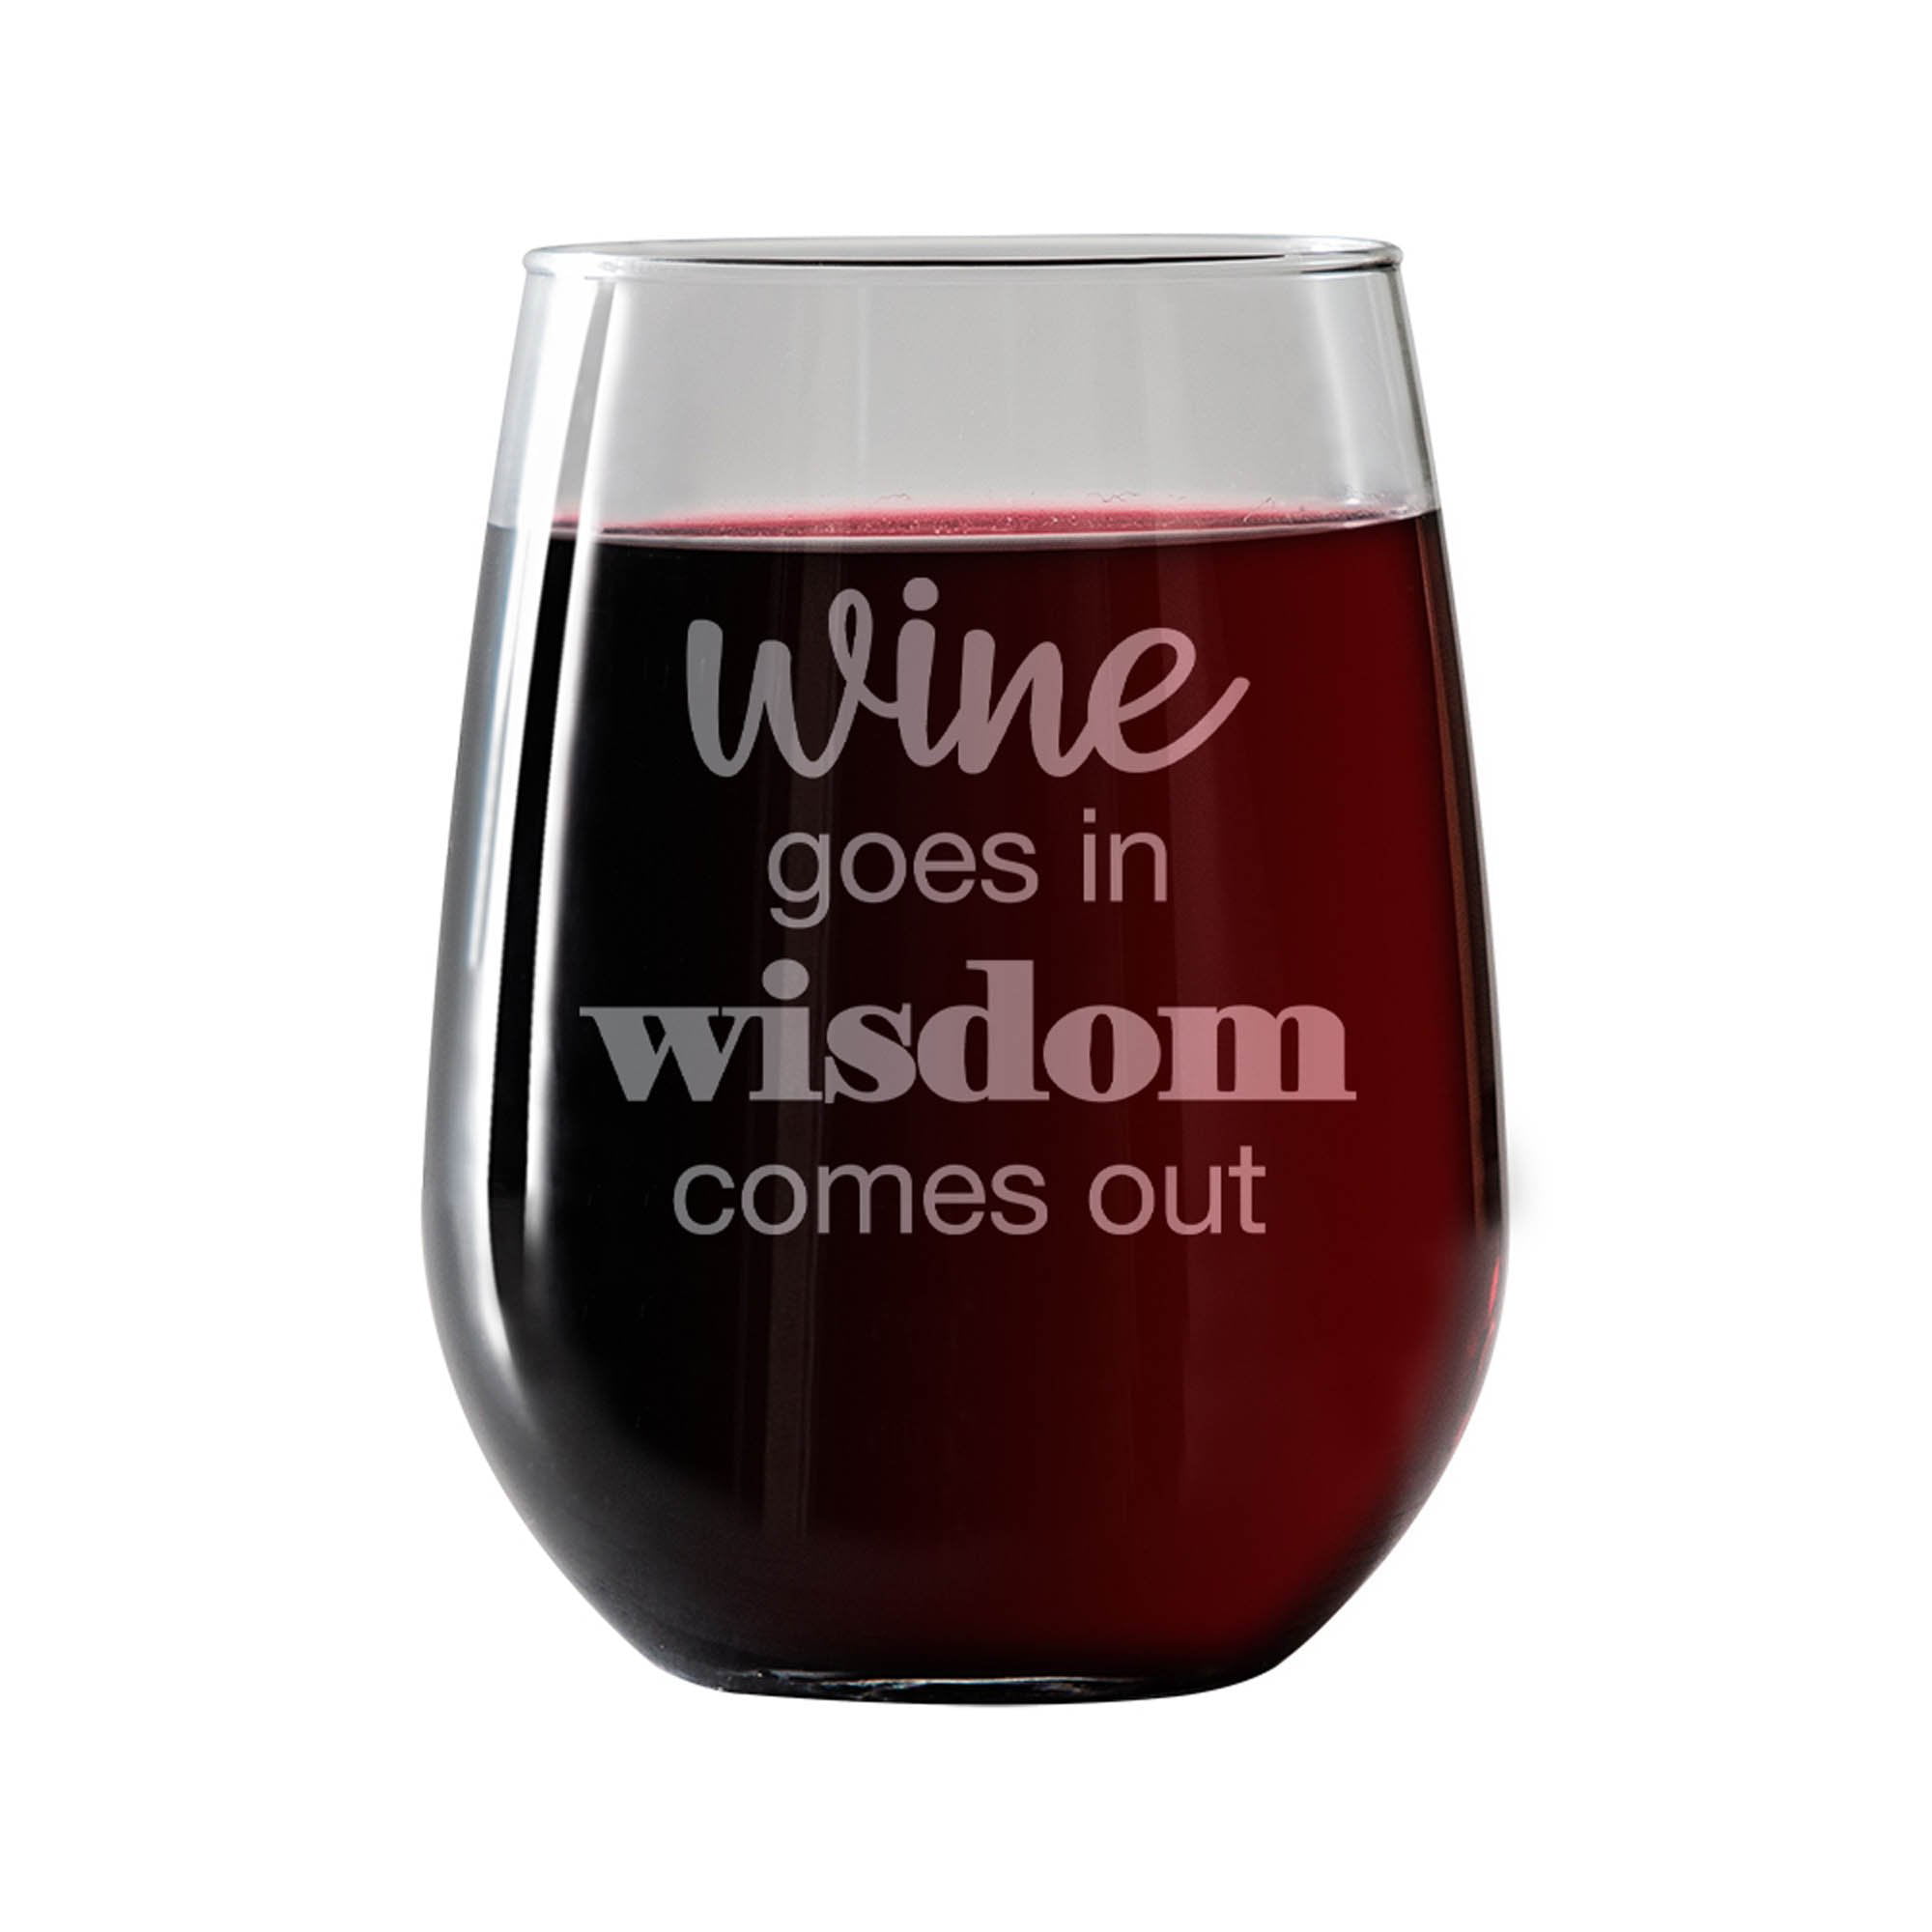 Wisdom Comes Out 9 Oz. Personalized Plastic Covered Wine Glass Red Wine Goes In 